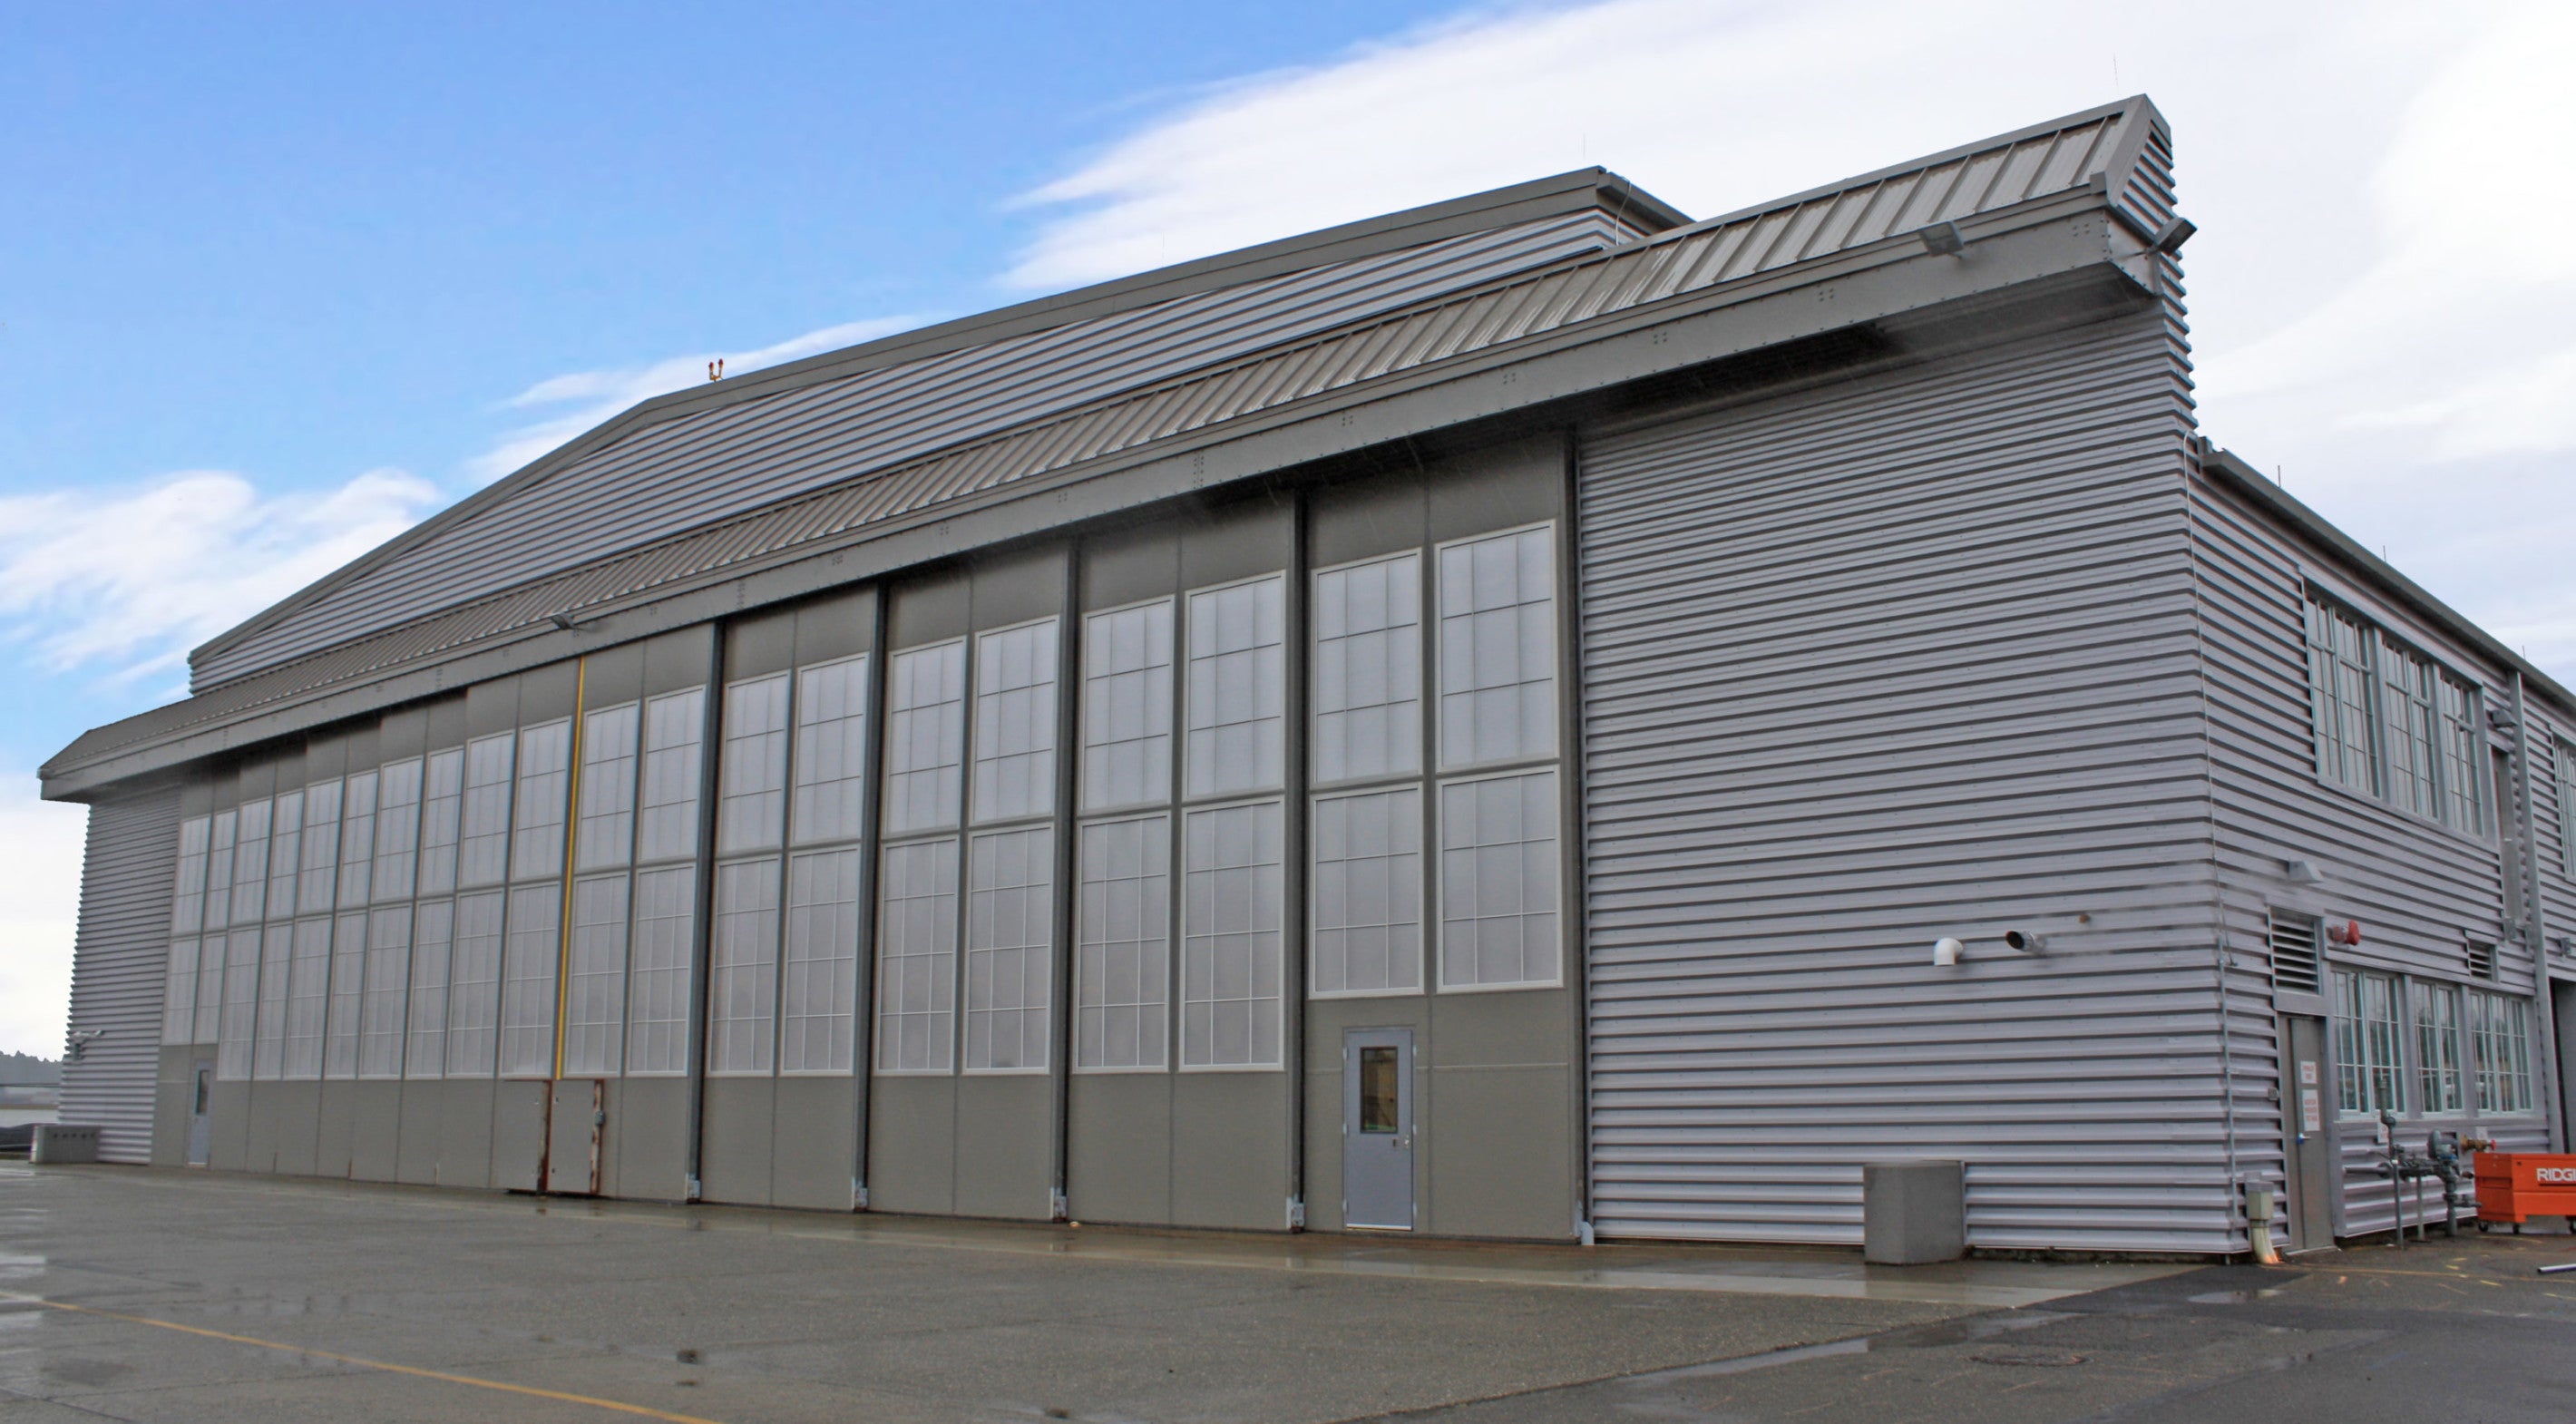 Helicopter Maintenance Hangars - Helix Design Group